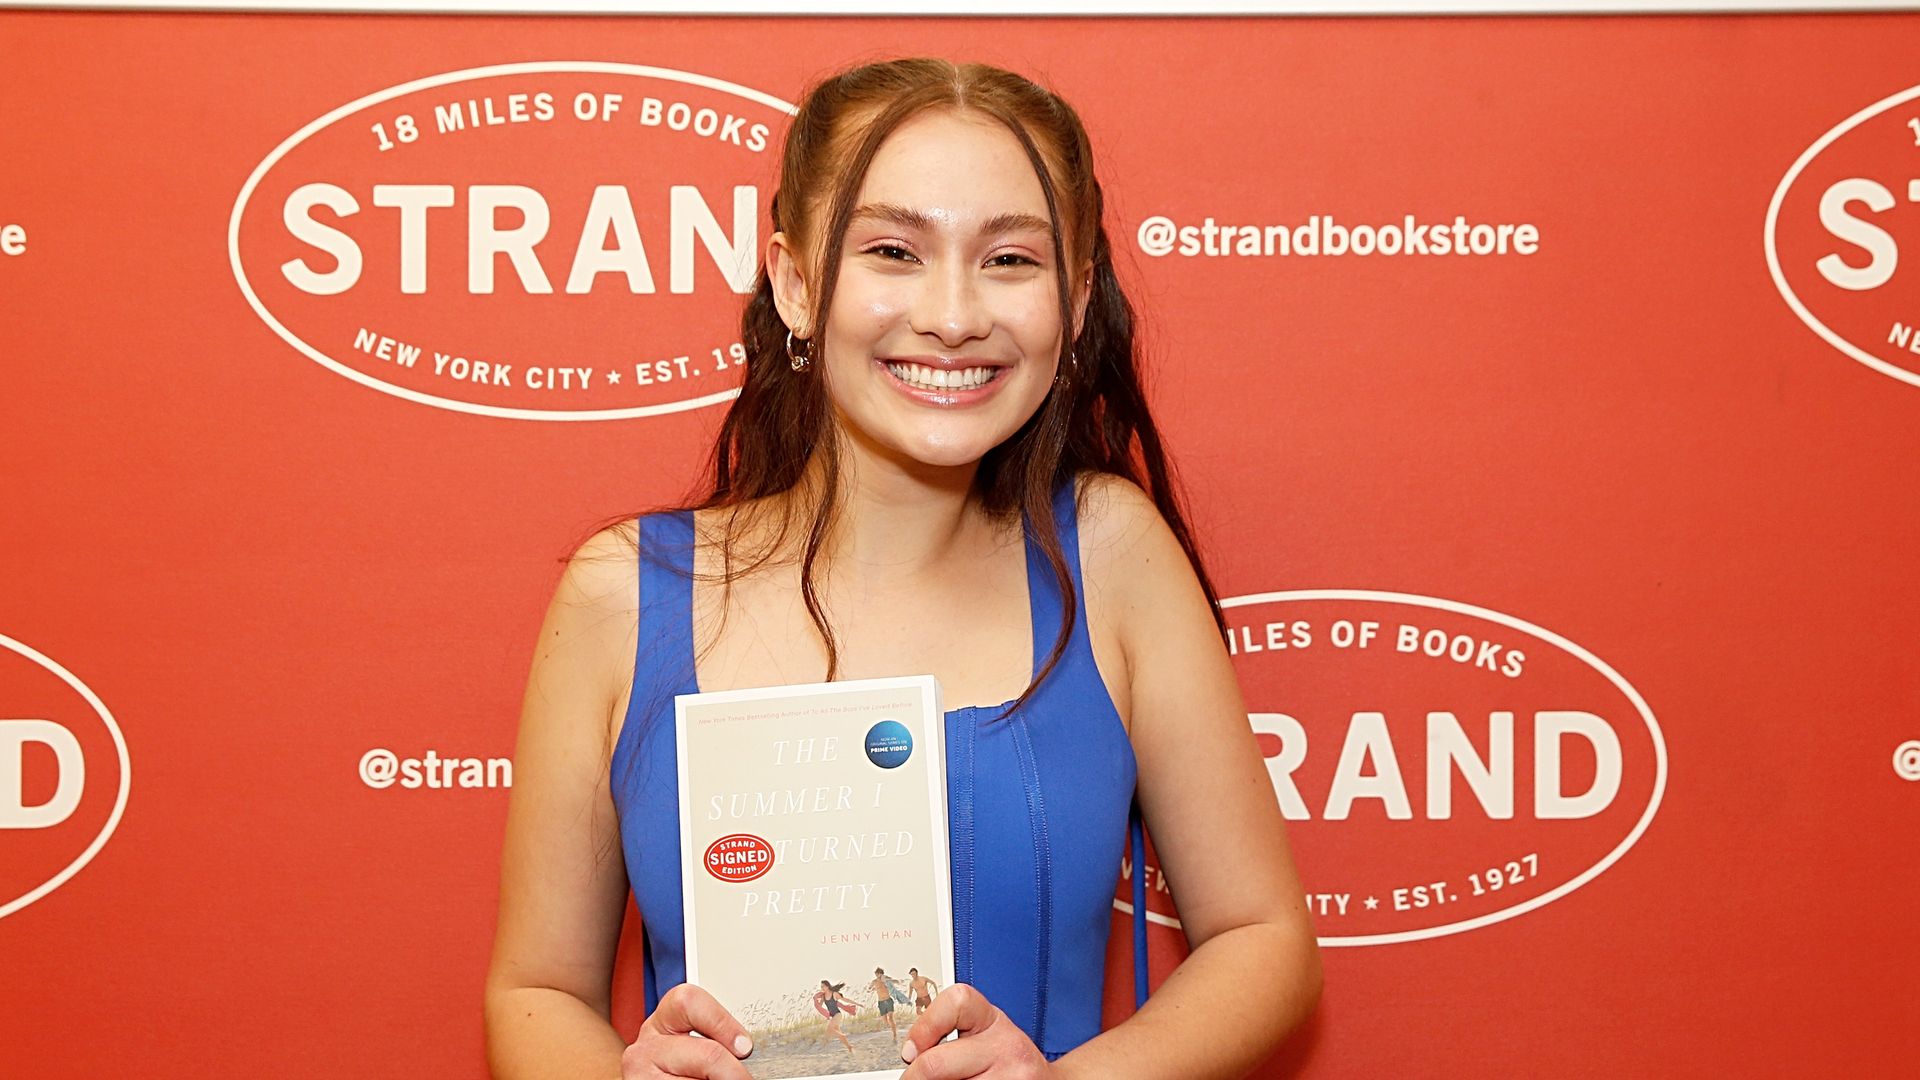 Lola Tung attends the "The Summer I Turned Pretty" discussion at Strand Bookstore on June 15, 2022 in New York City.